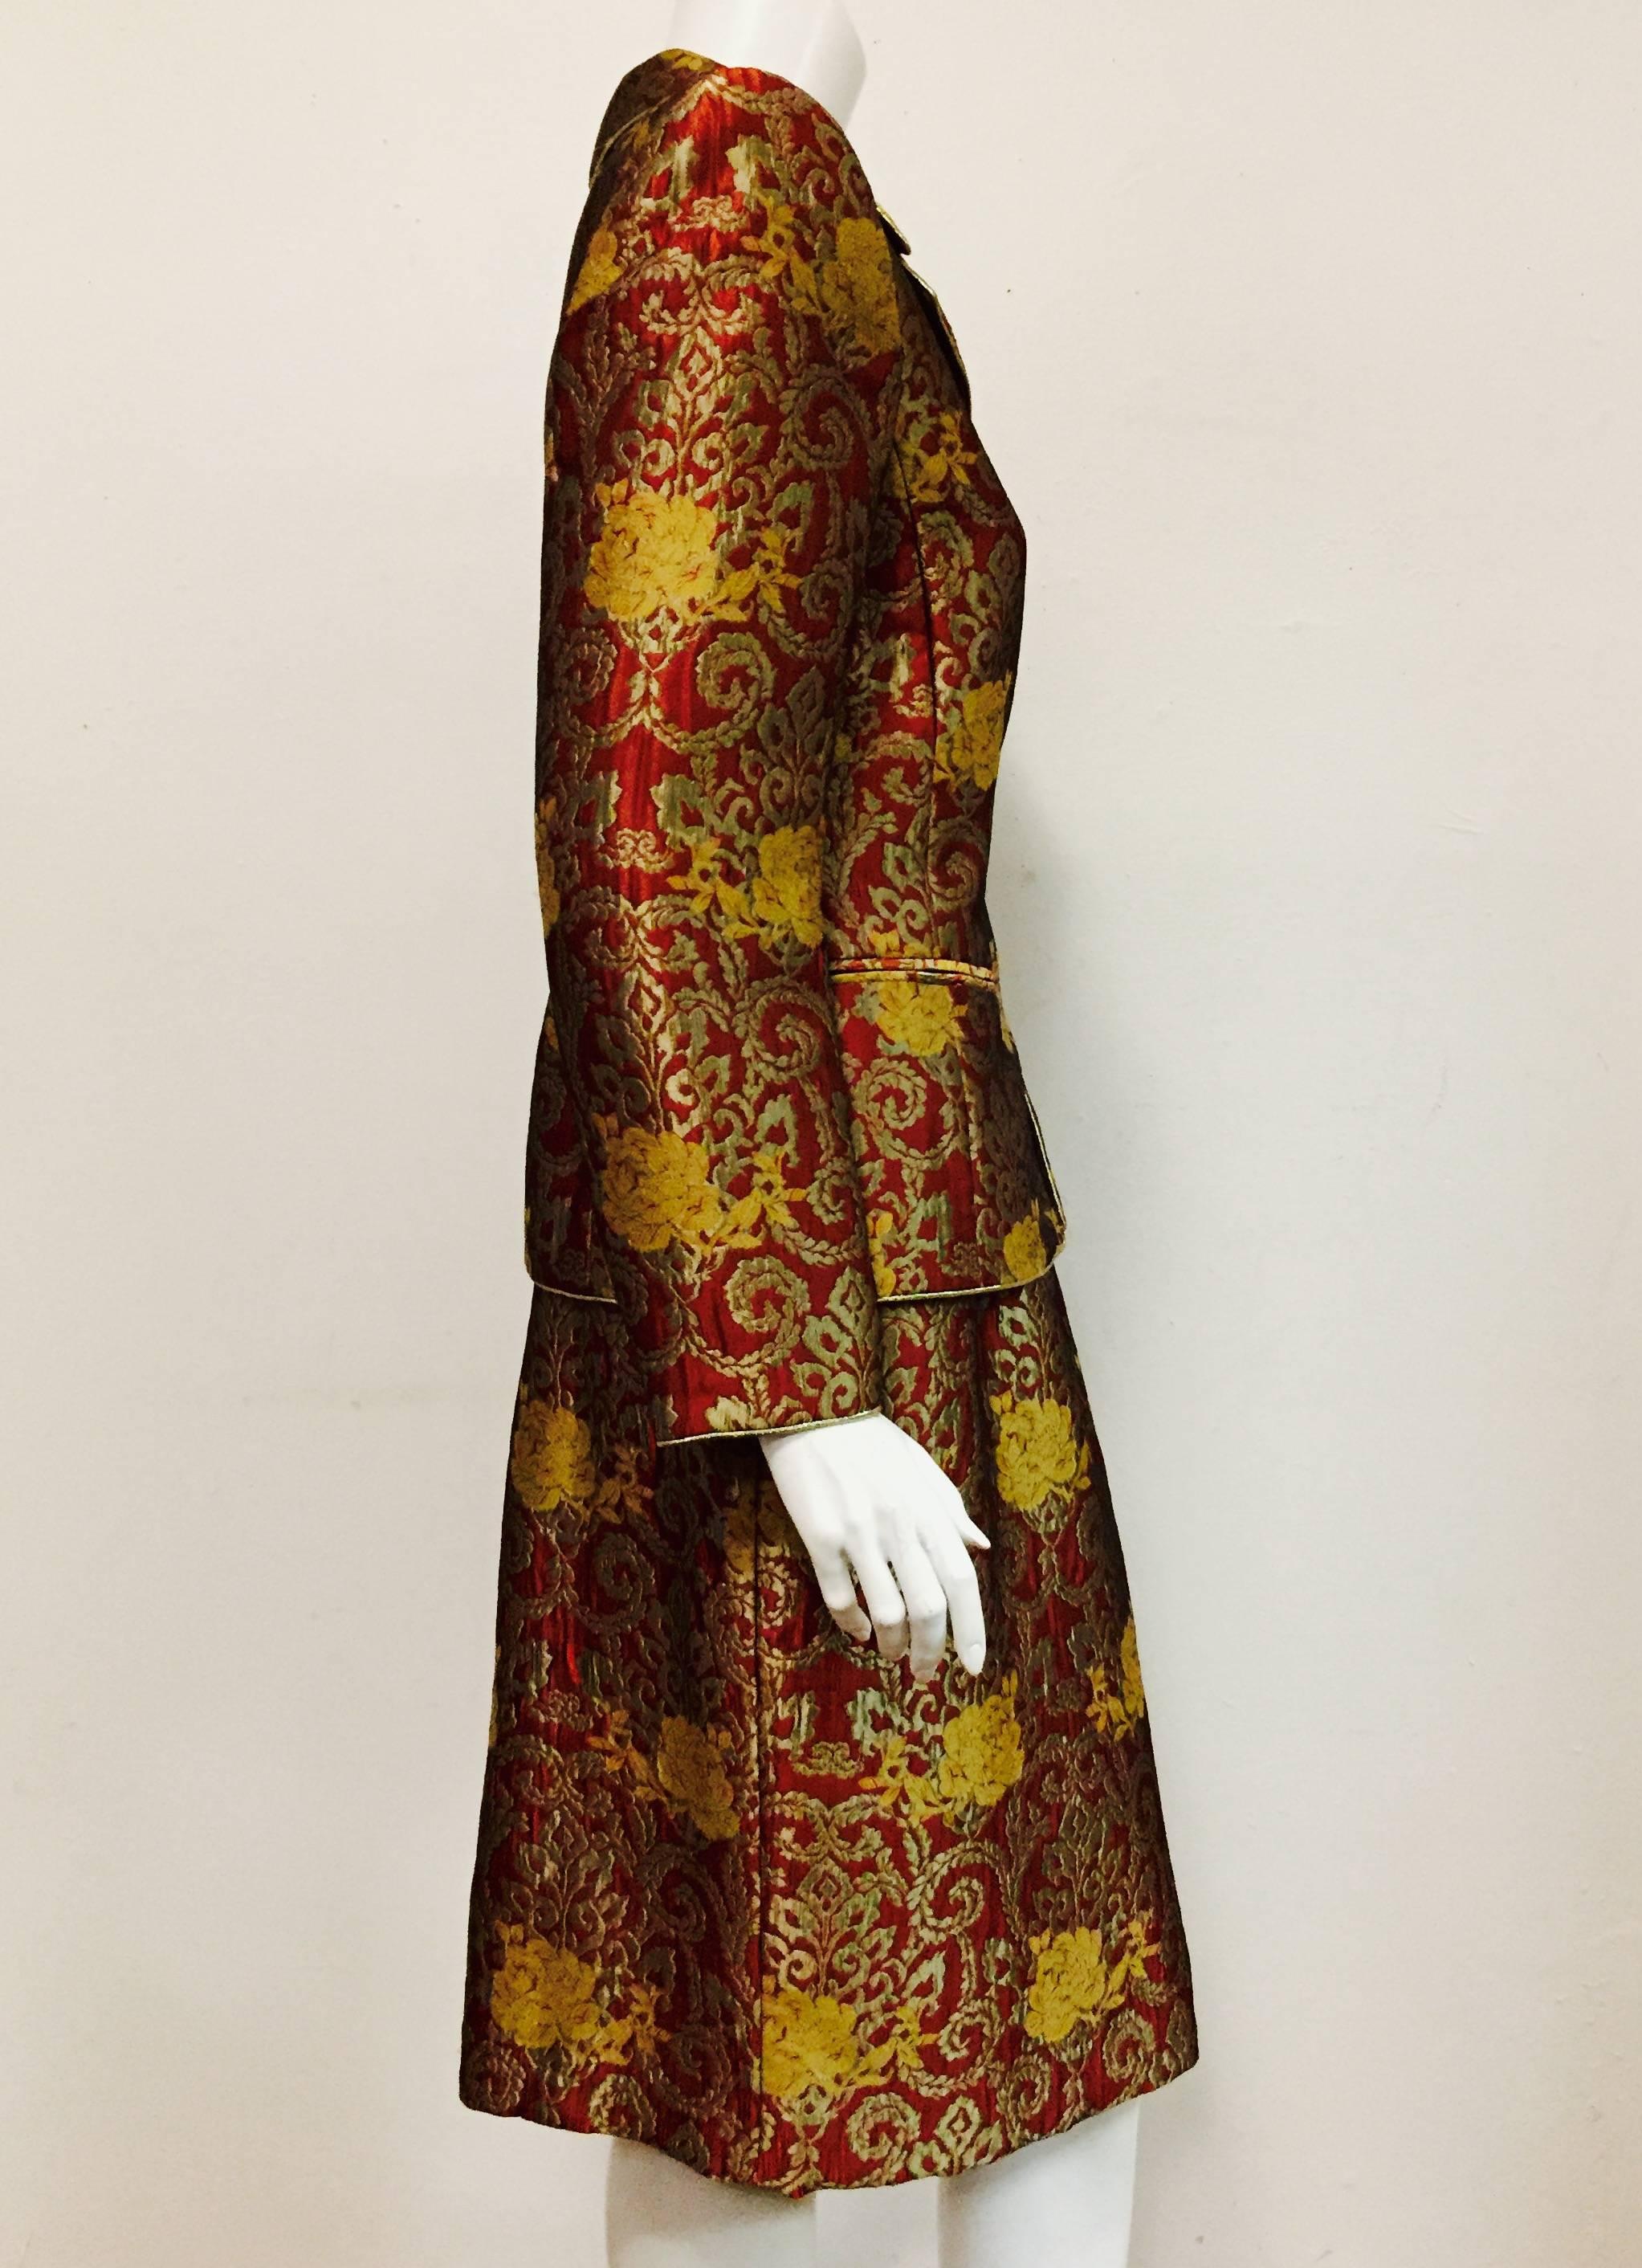 Brown Magnificent Mary McFadden Floral Brocade Skirt Suit in Rust, Bronze and Gold 